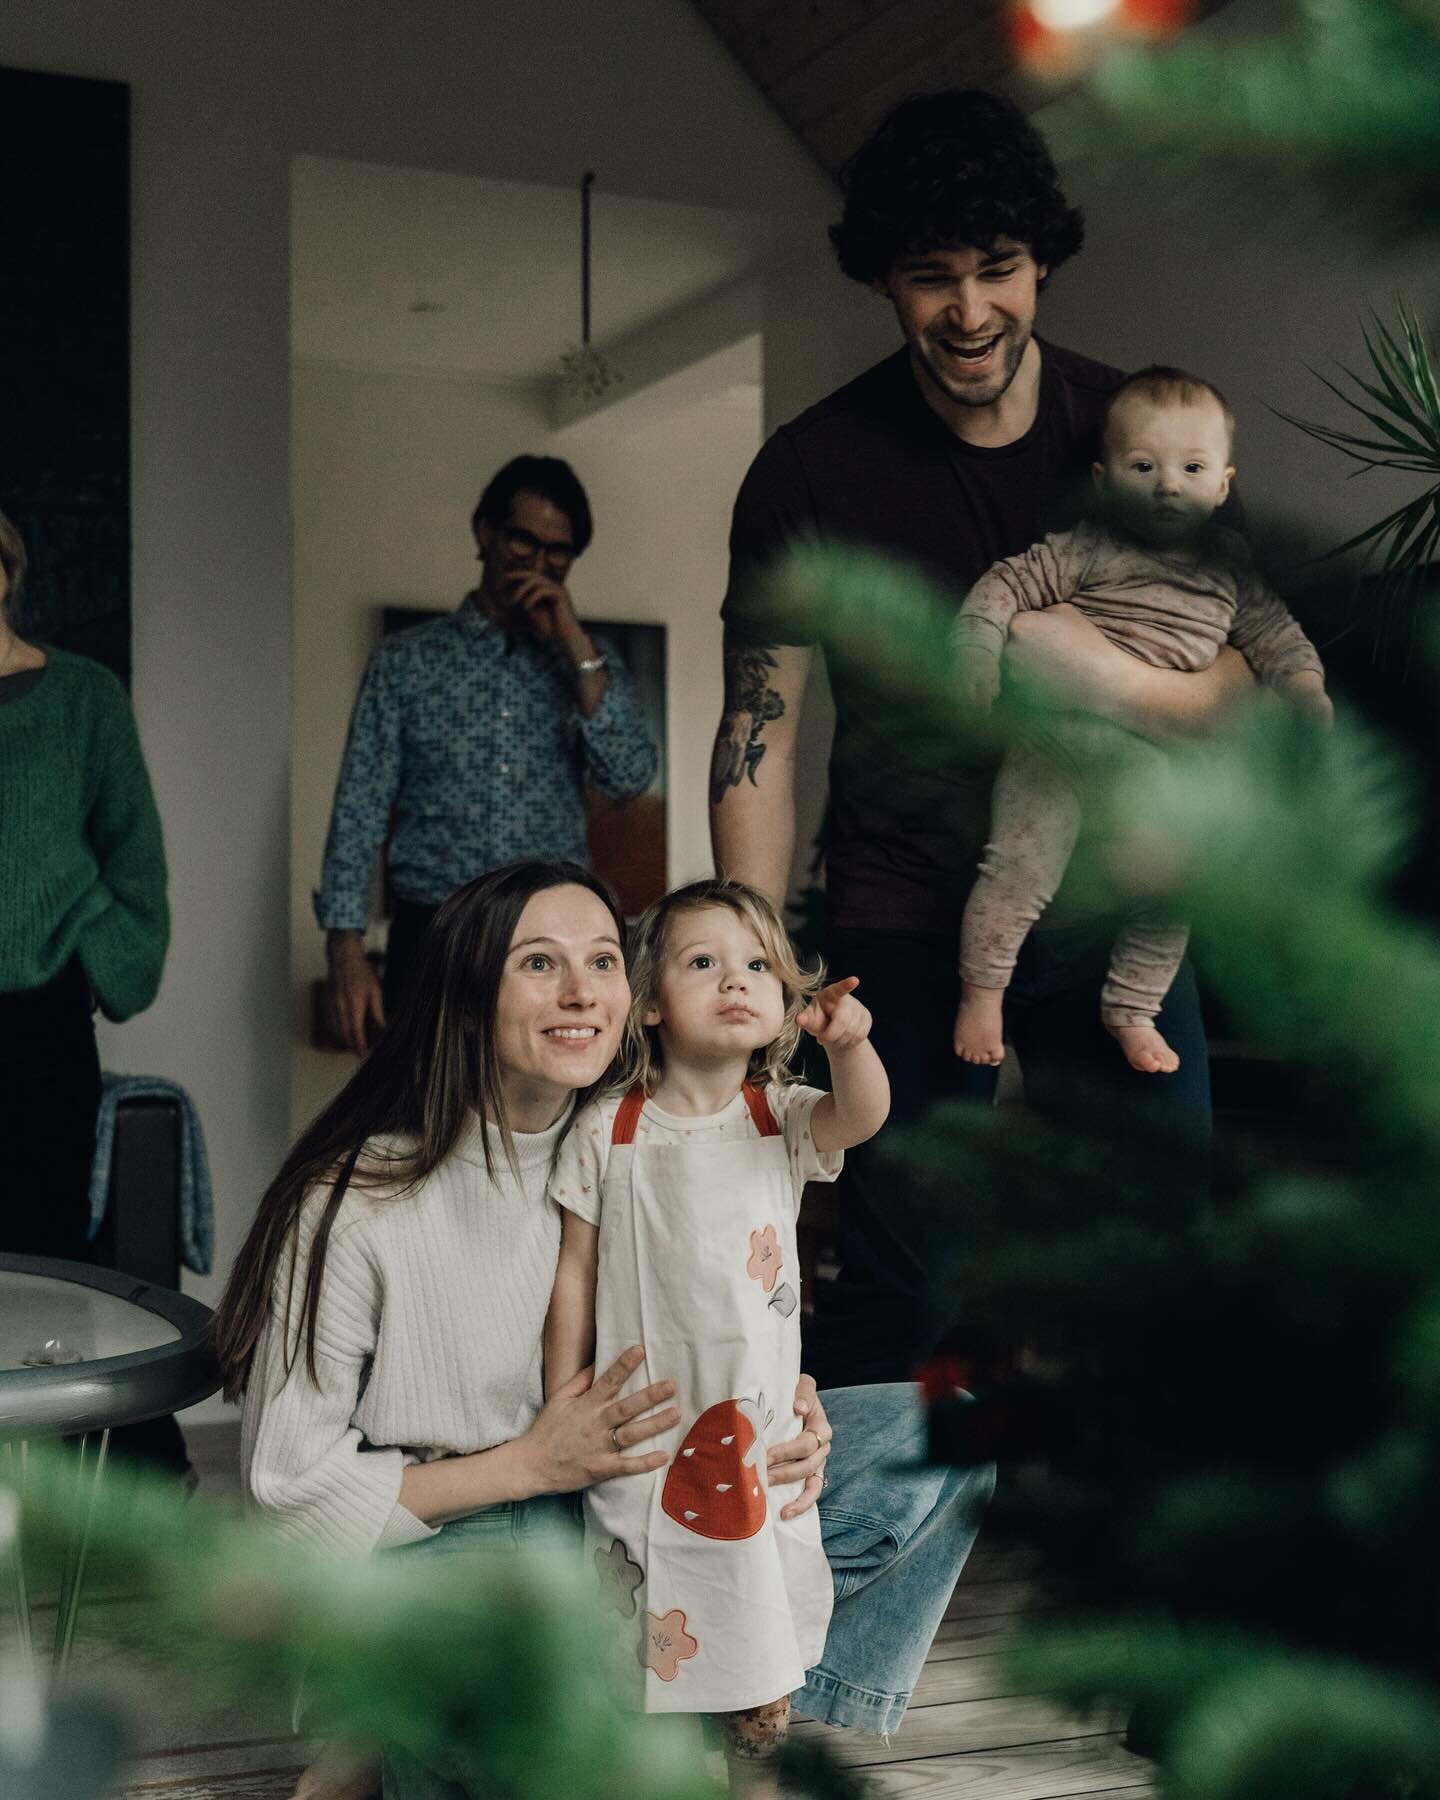 Some cute family photos from last Christmas 🎄
.
.
.
.
.
@srhfischer 
#familyphotography #familyphotoscopenhagen #copenhagenfamilyphotography